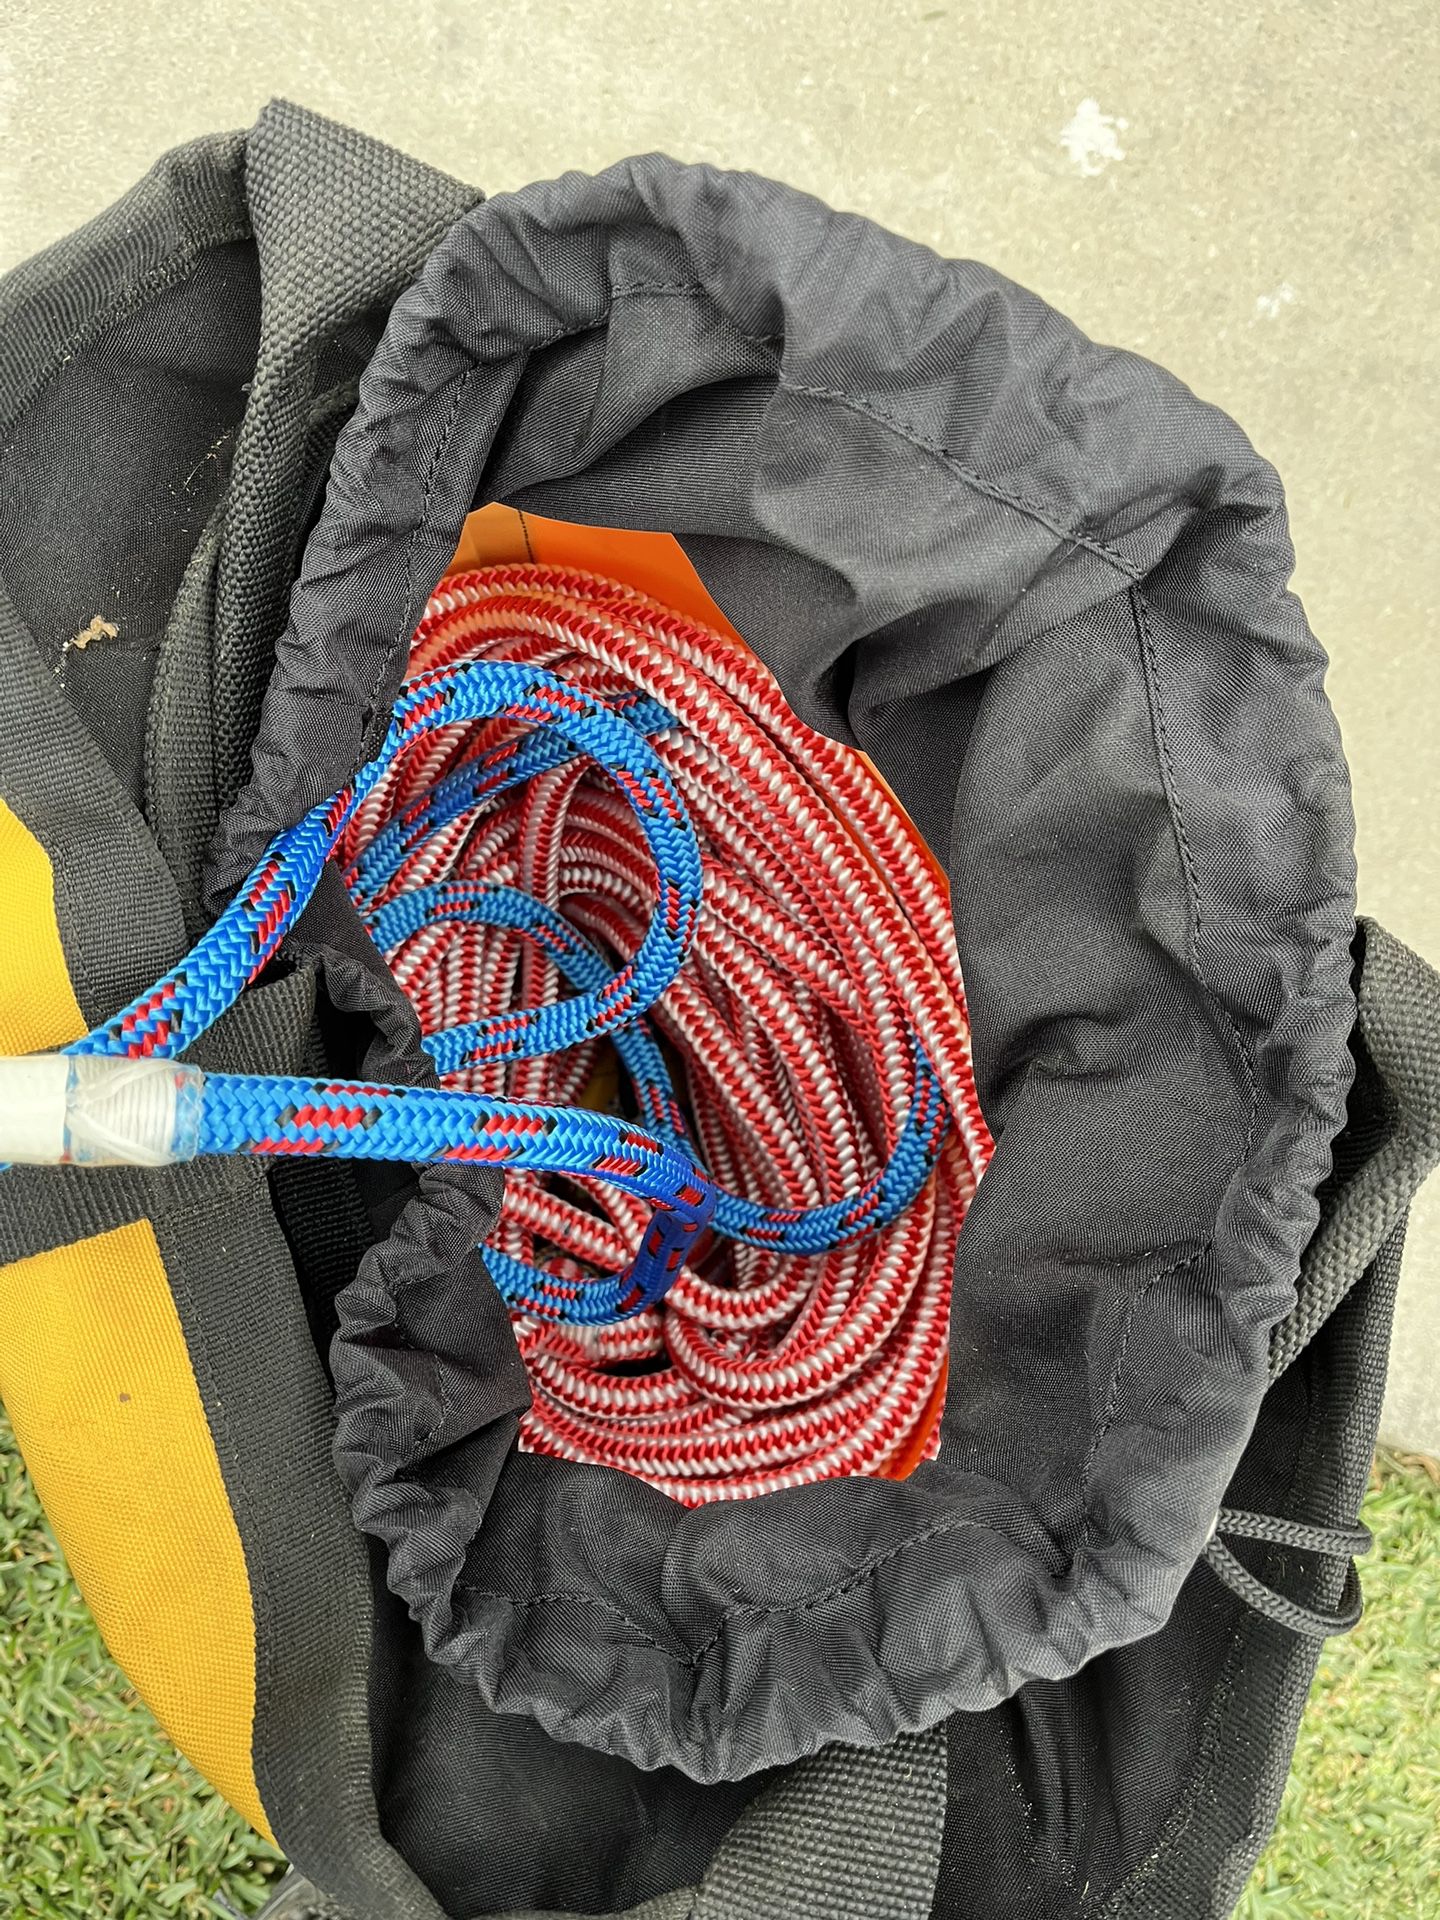 Notch Saddle Brand New / 120 Foot Spliced Eye Rope With Bag 